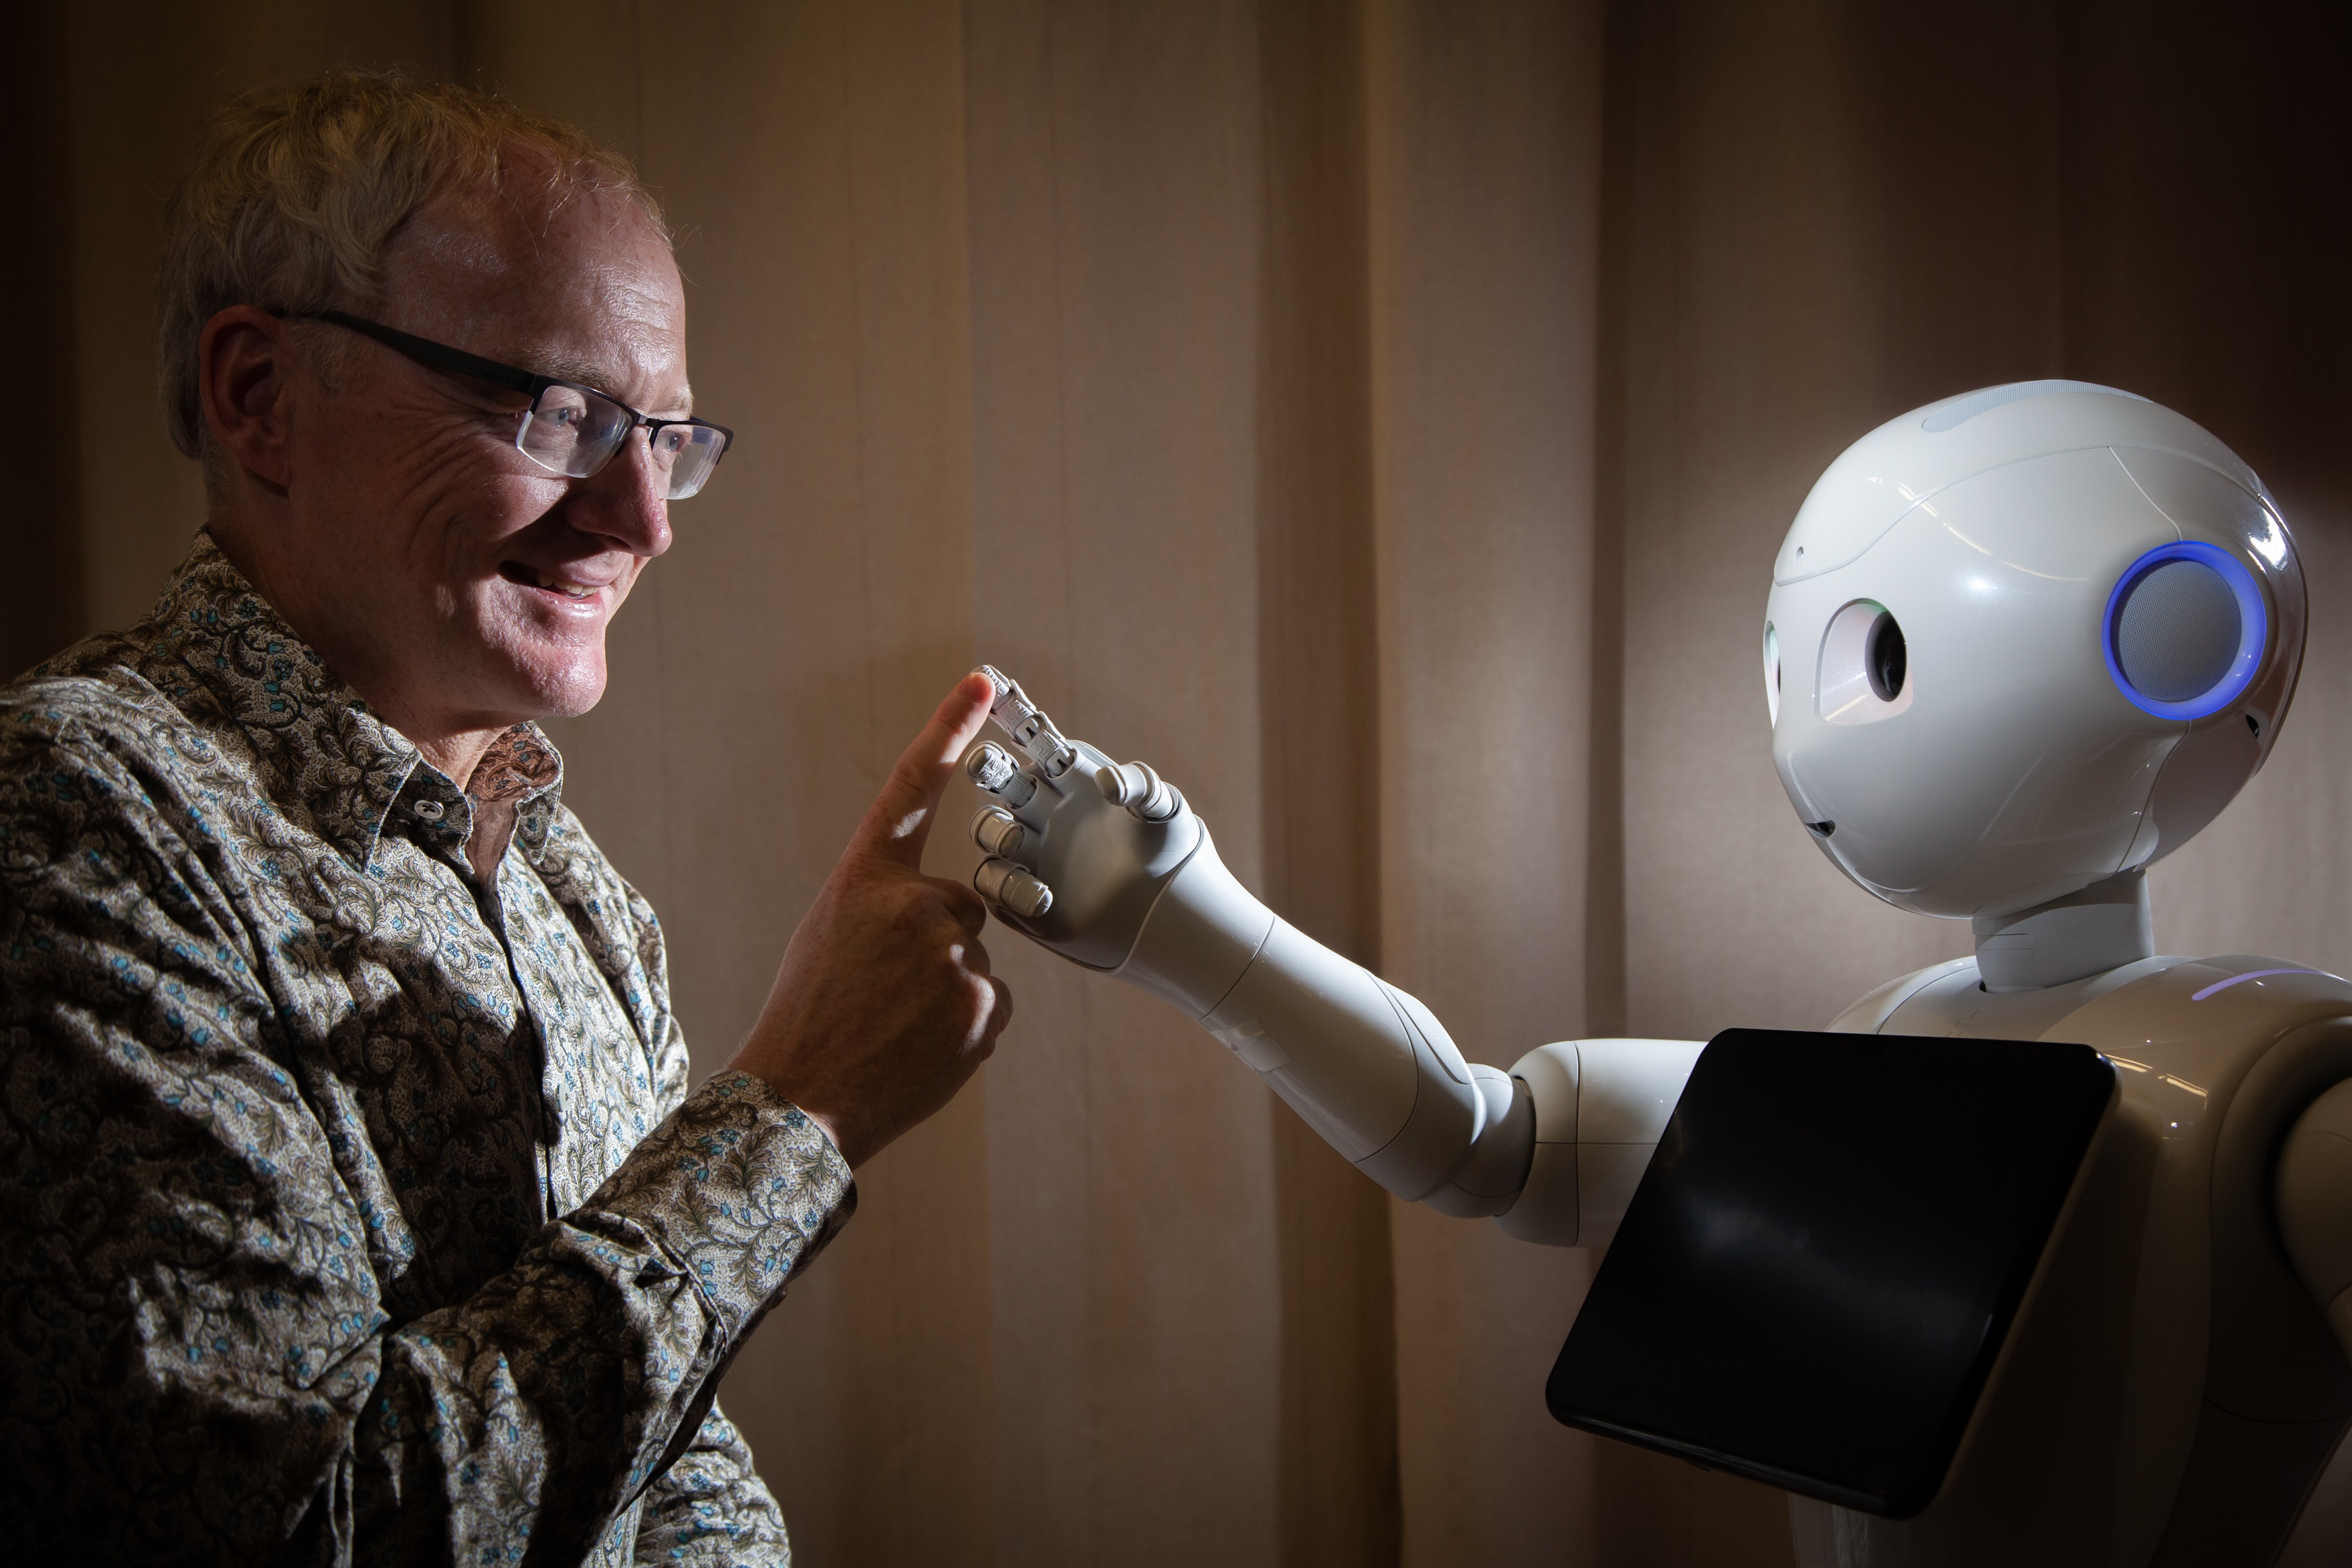 Prof.Toby Walsh with a Pepper robot